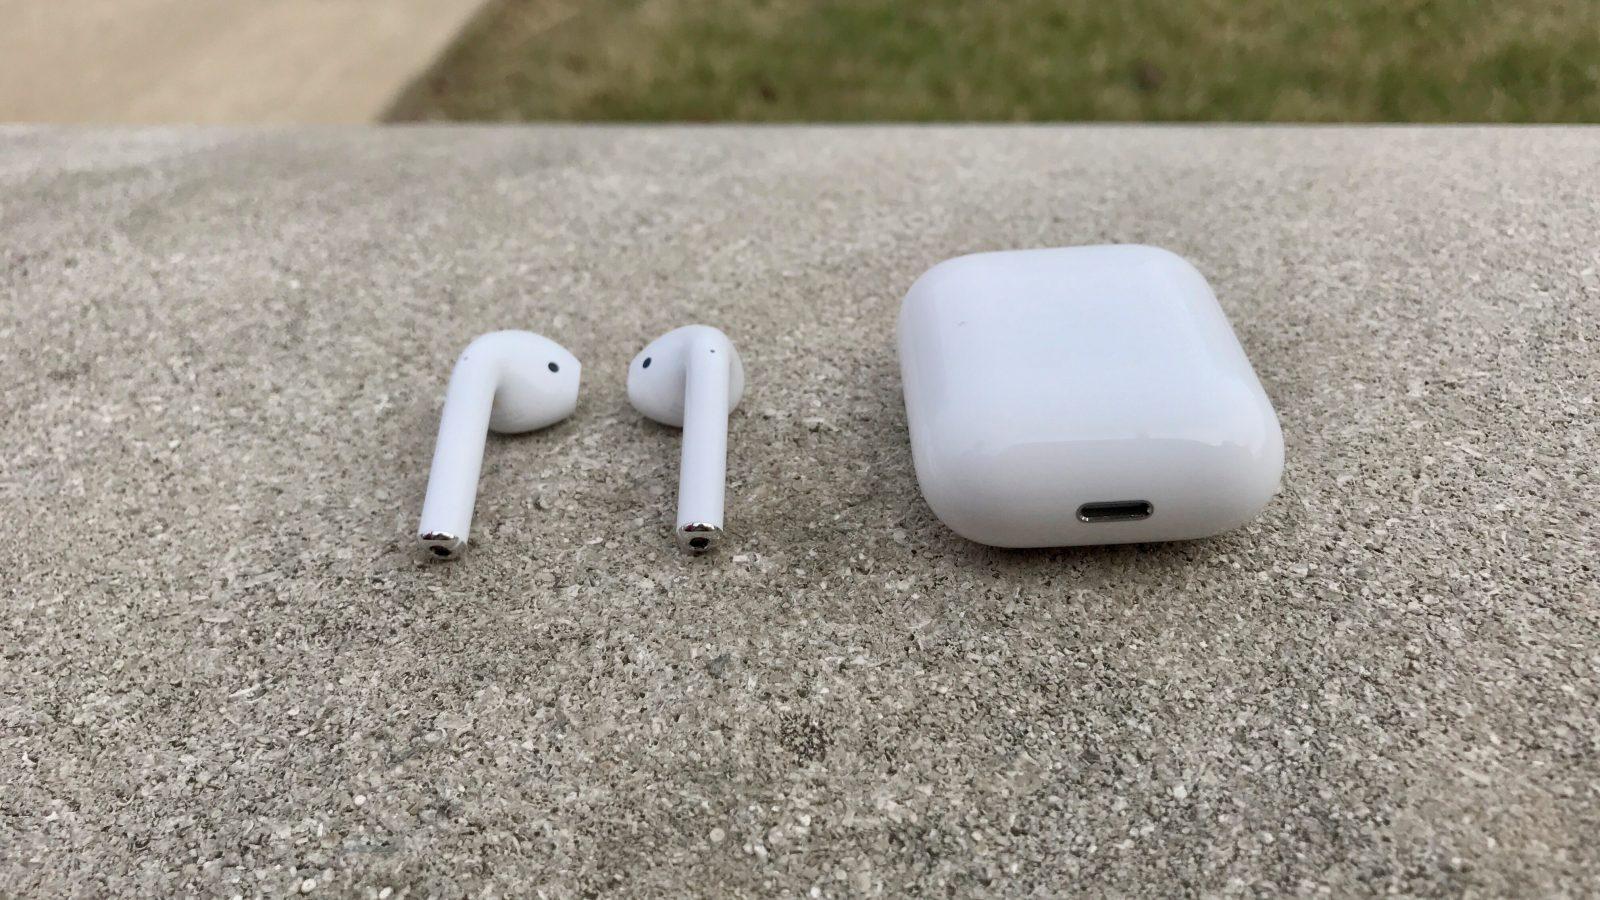 airpods 2 wallpapers wallpaper cave on airpods 2 wallpapers